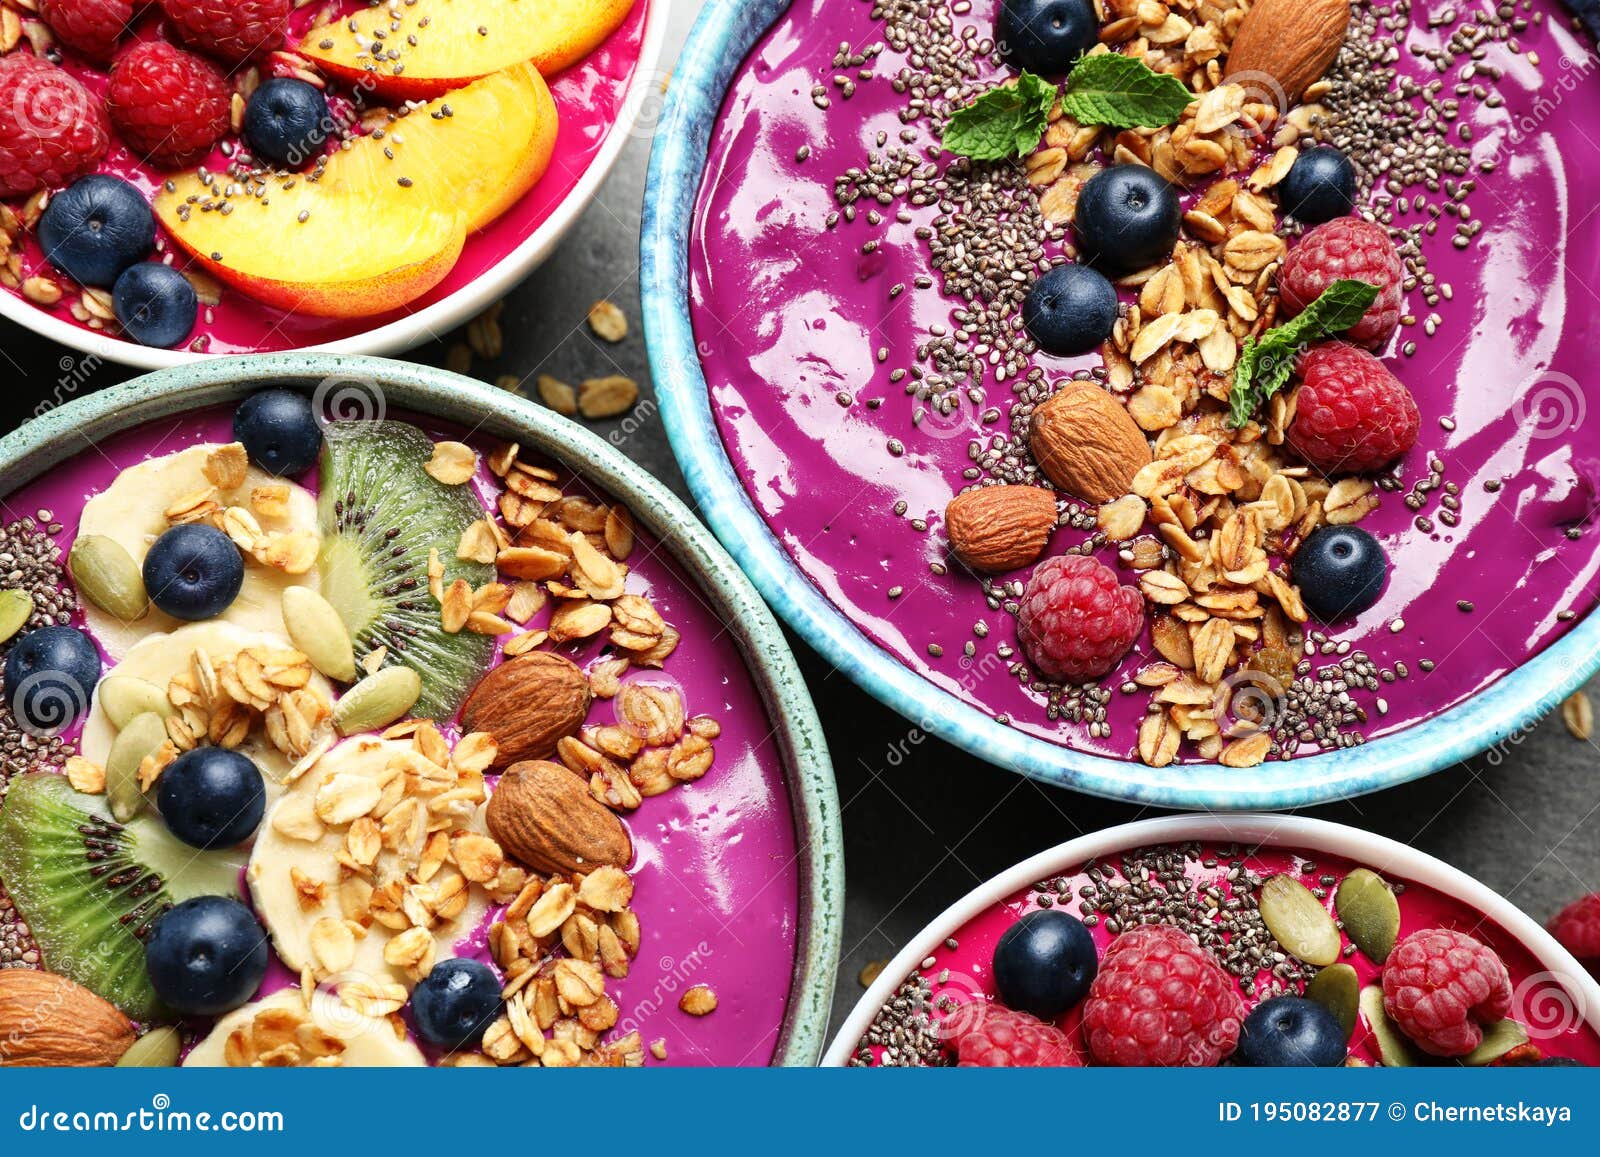 delicious acai smoothie with toppings in bowls on table